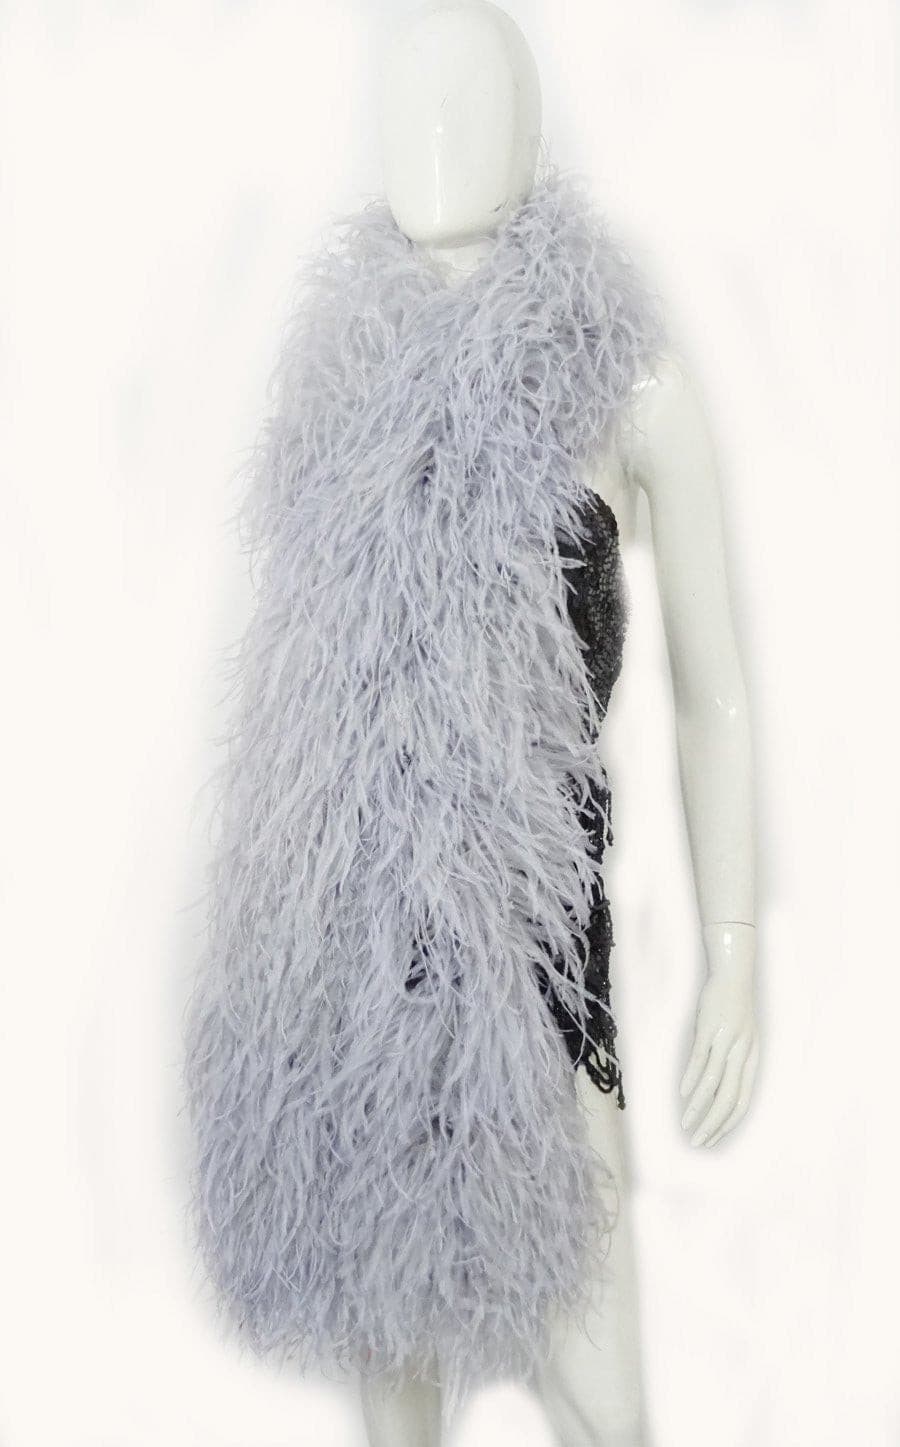 Soarer Grey Ostrich Feather Boa - 2yards 1Ply Long Boas for Party Decor,DIY Production,DIY Craft Sewing(Grey)